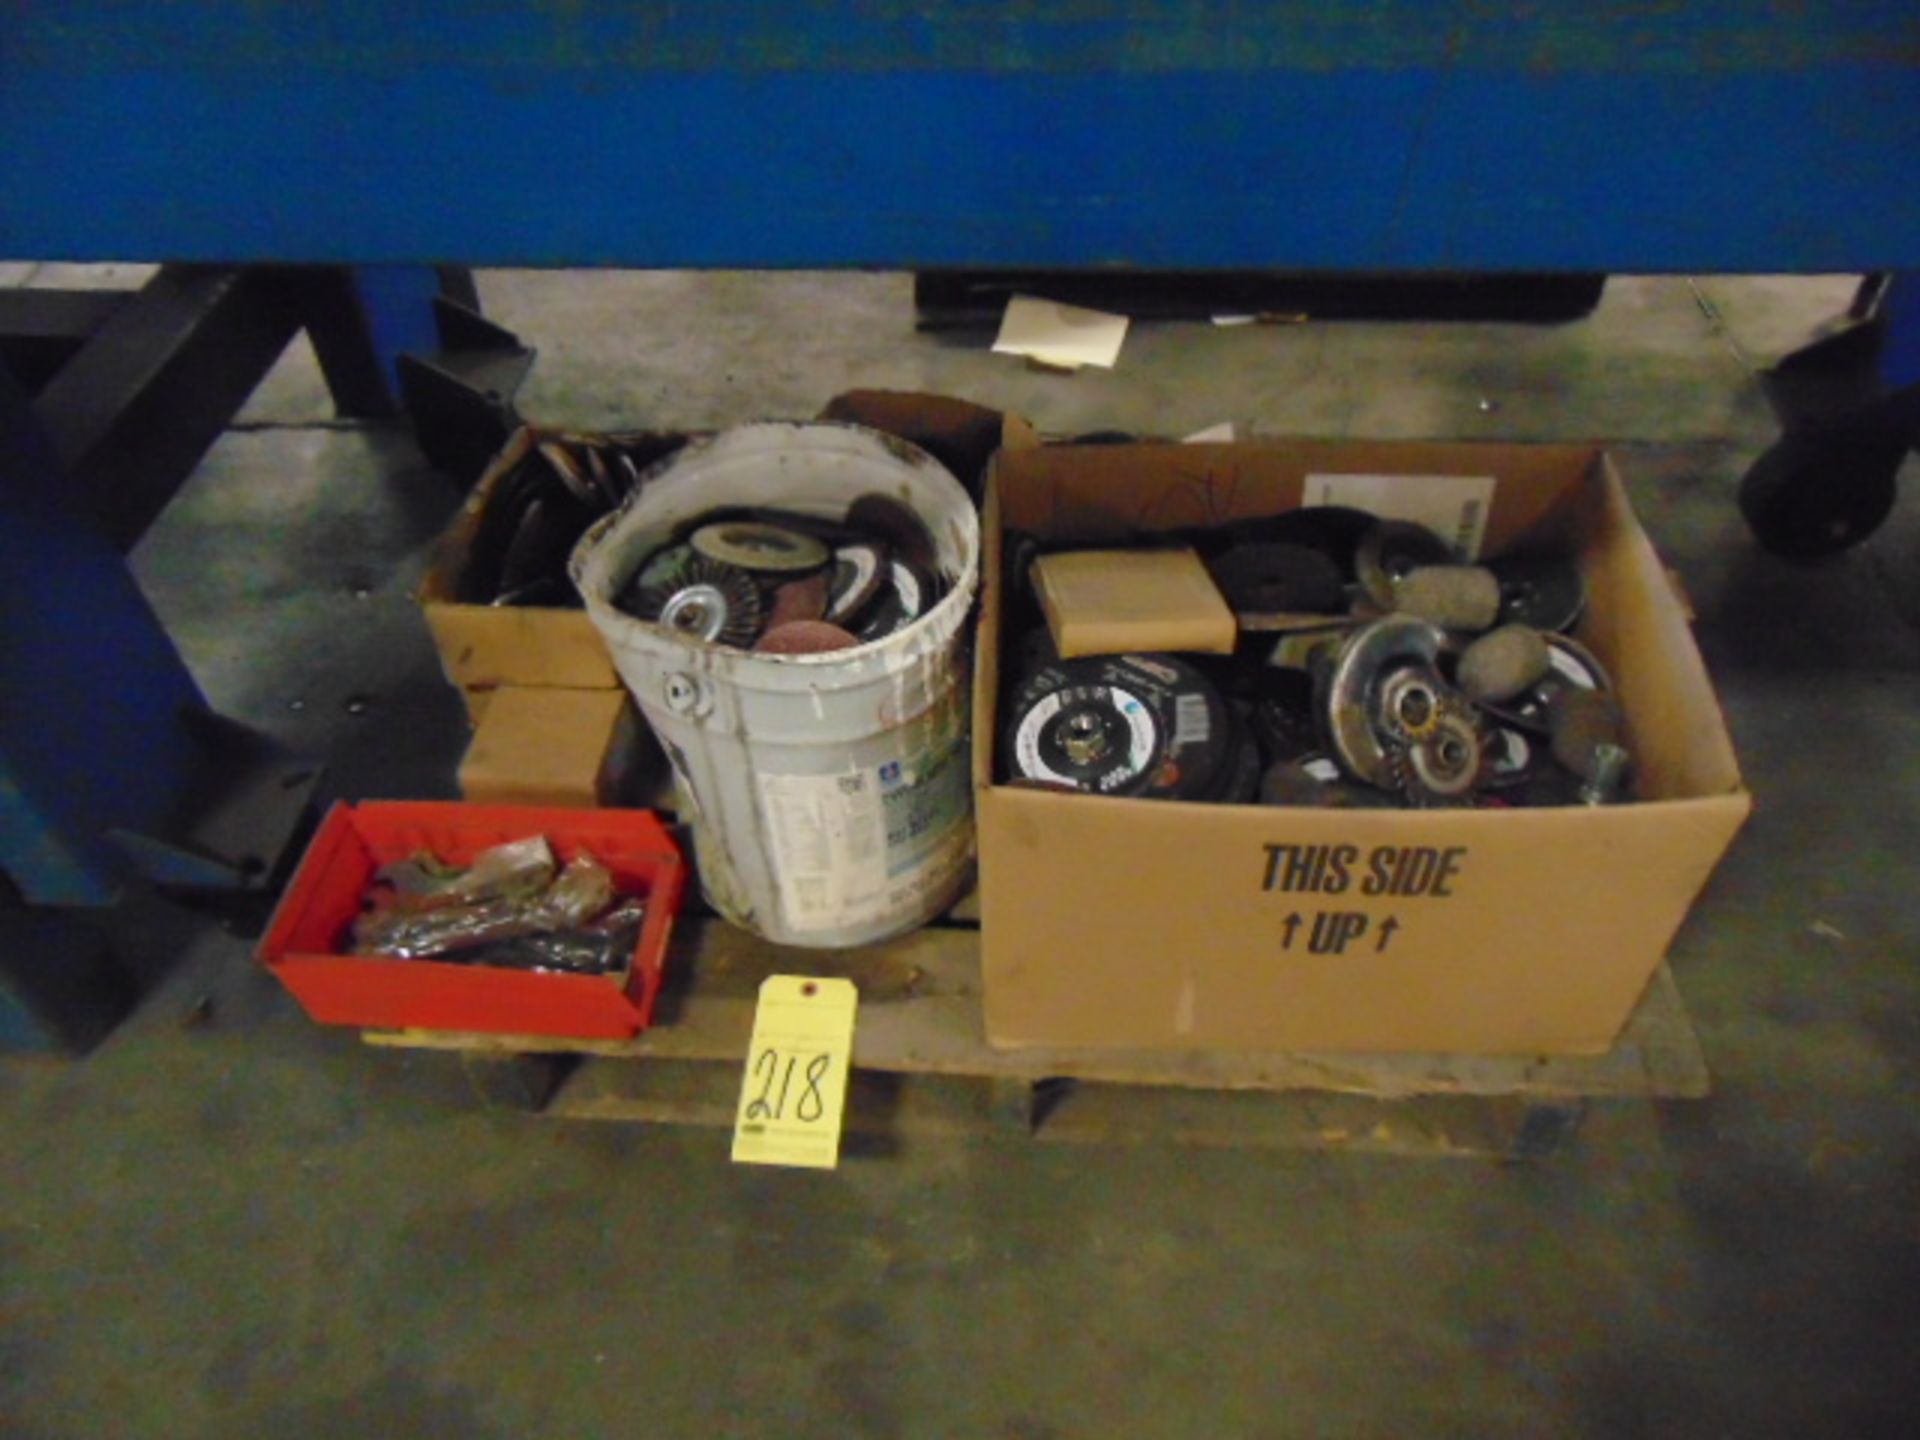 LOT CONSISTING OF: assorted grinding wheels, wire wheels & grinding stones (under two benches)